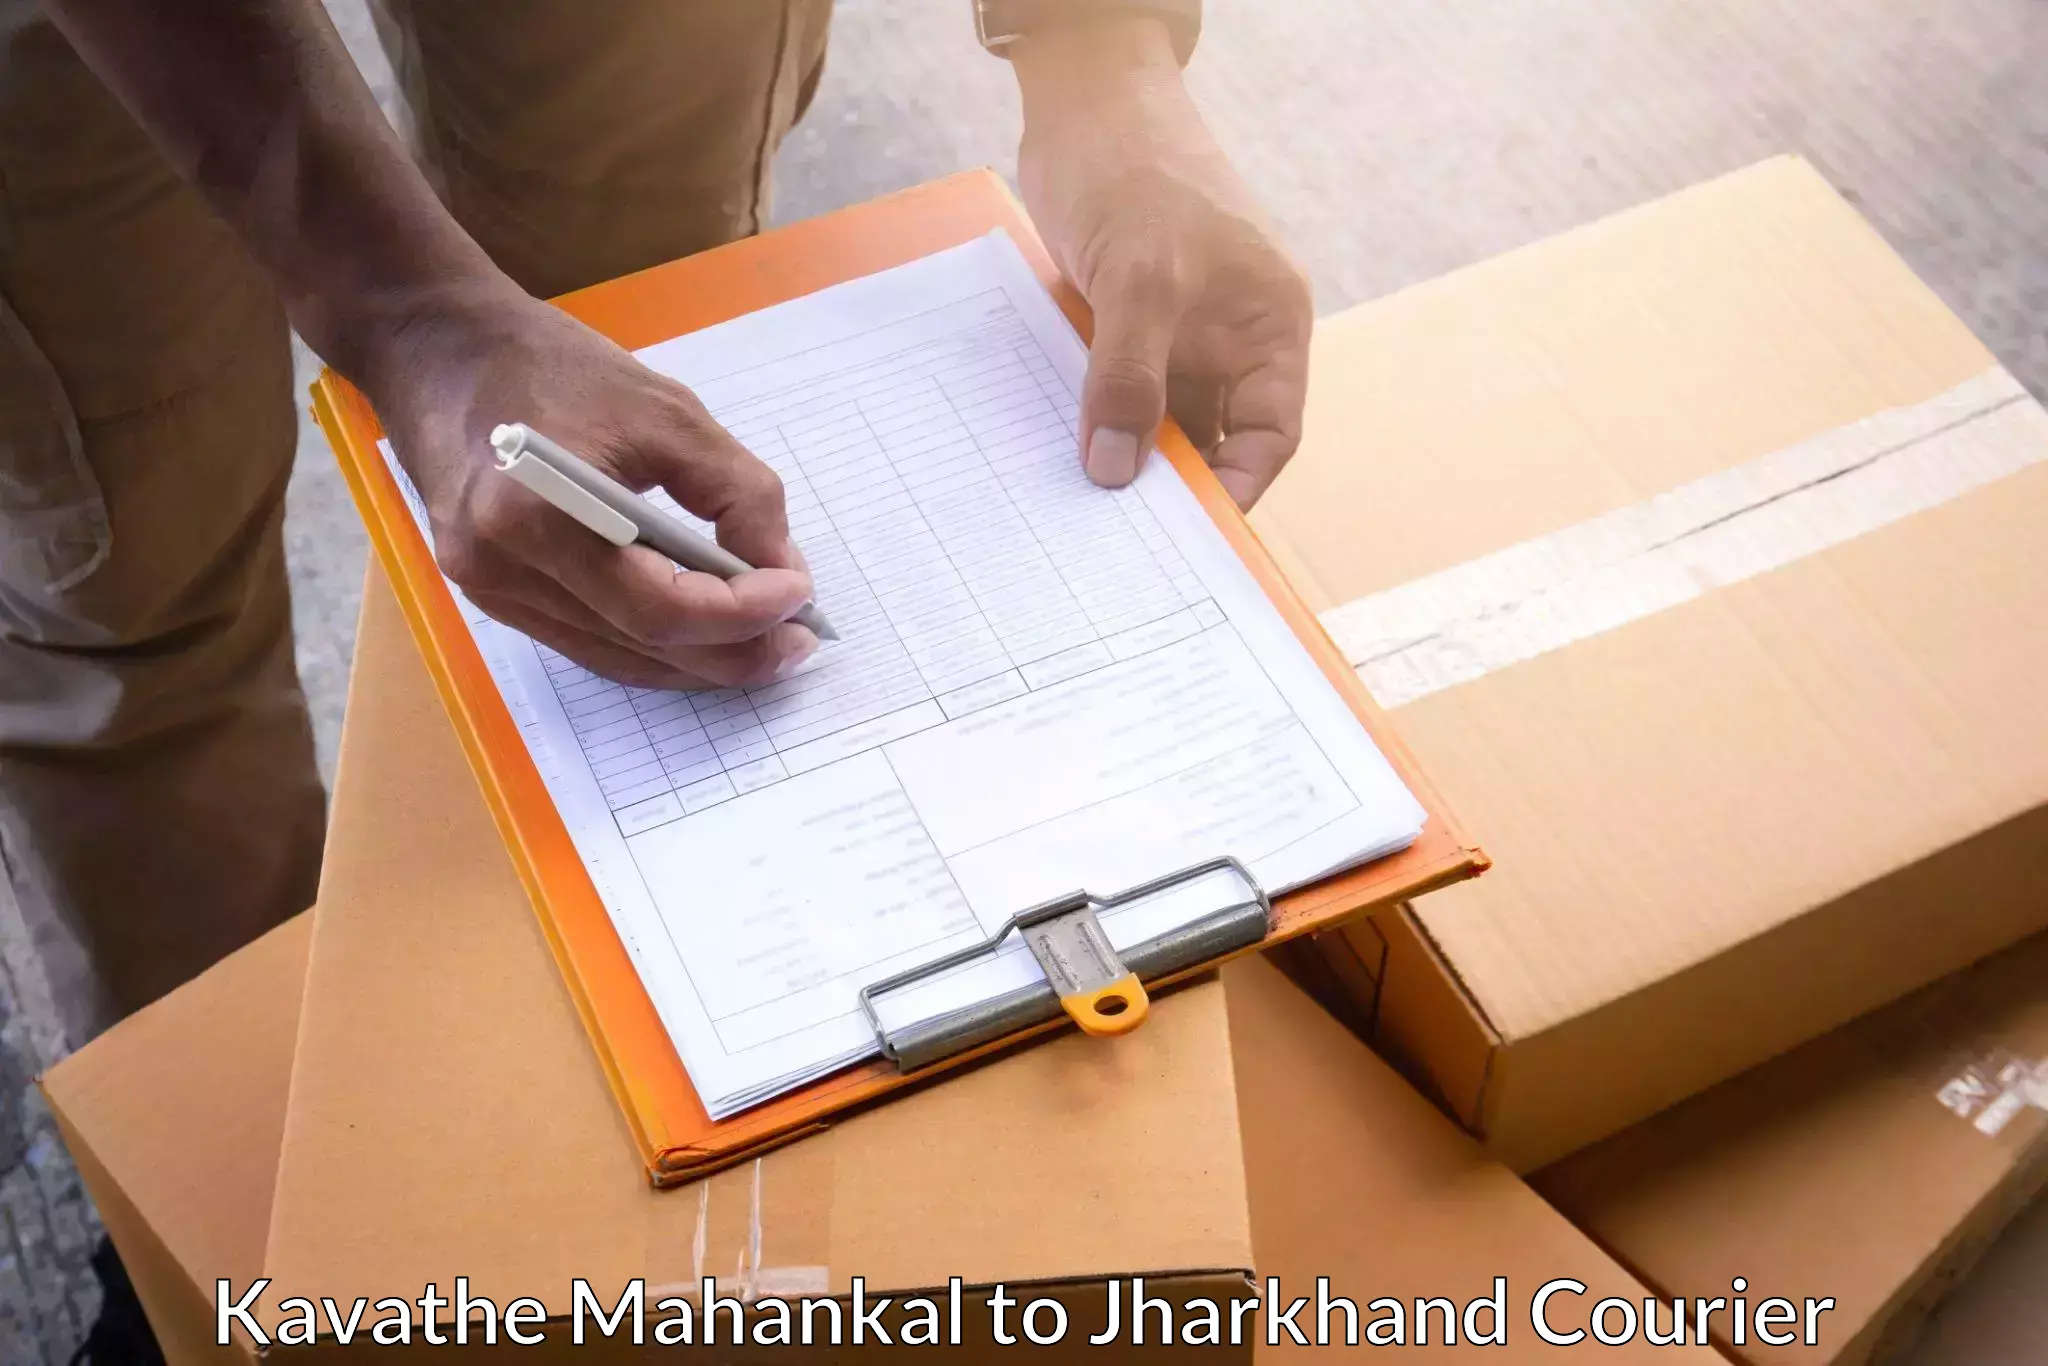 Specialized courier services Kavathe Mahankal to Padma Hazaribagh